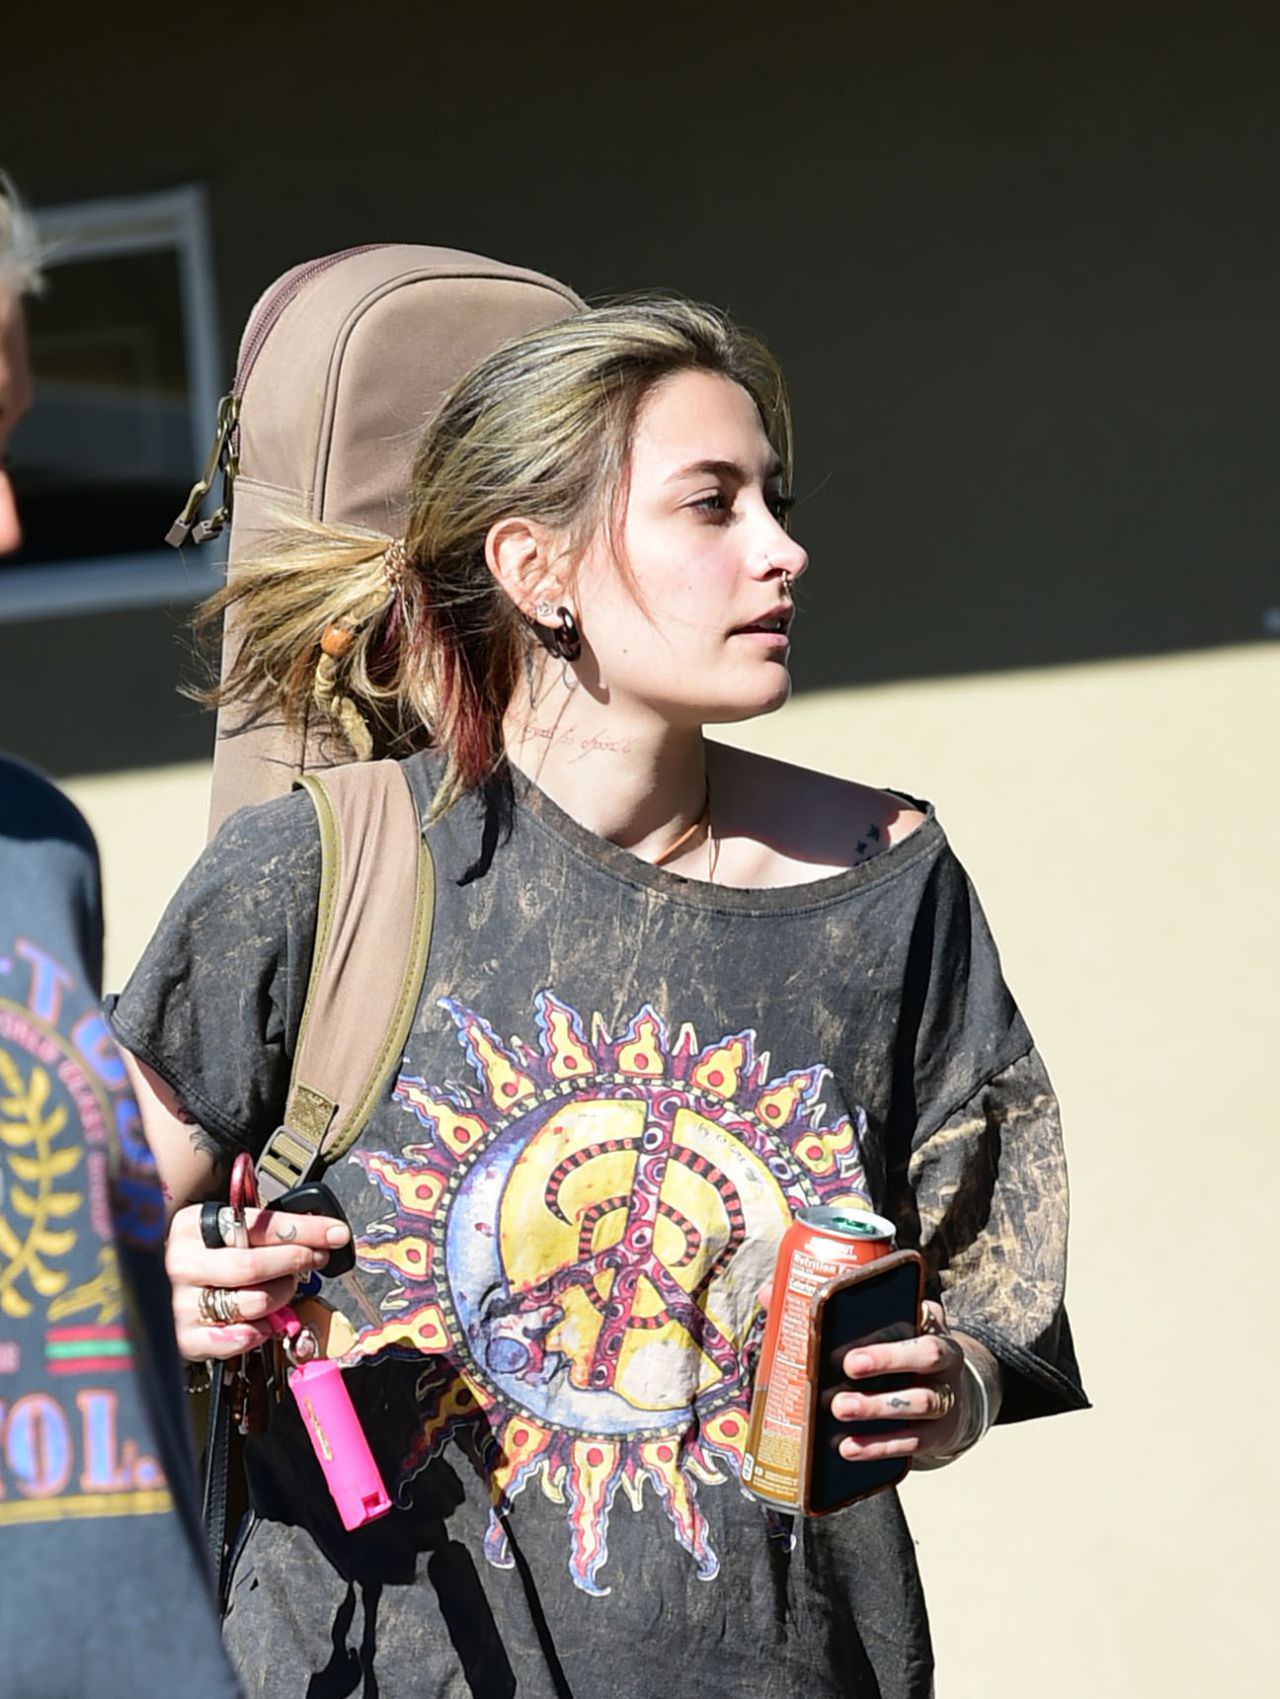 paris jackson in a peace sign t shirt as she smokes with friends 4